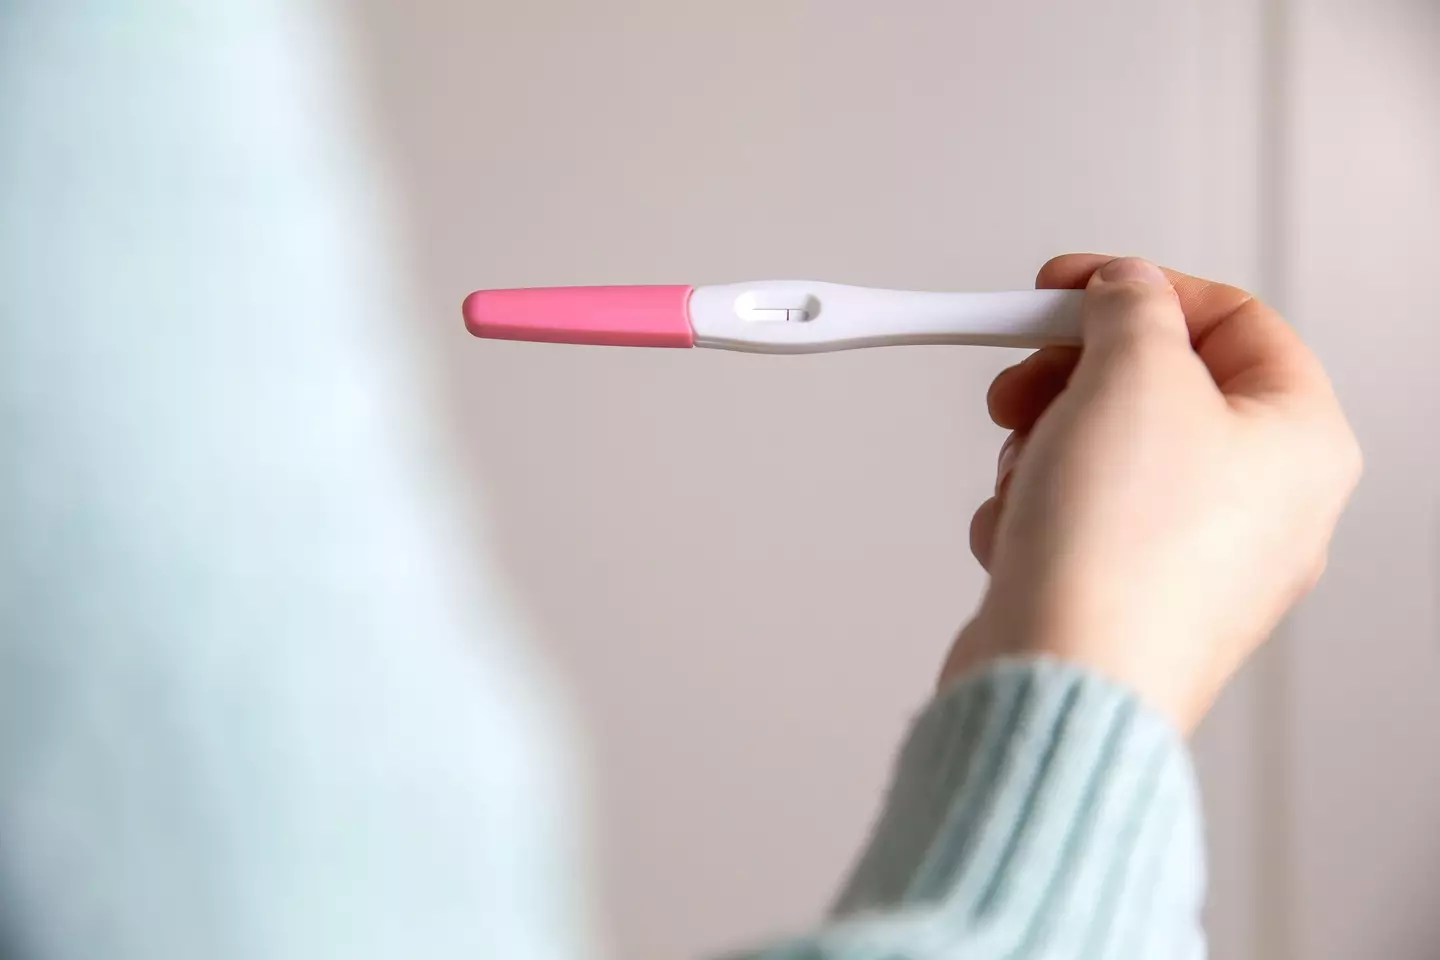 A woman in her 30s has suffered a ruptured ectopic pregnancy, despite having a negative pregnancy test.